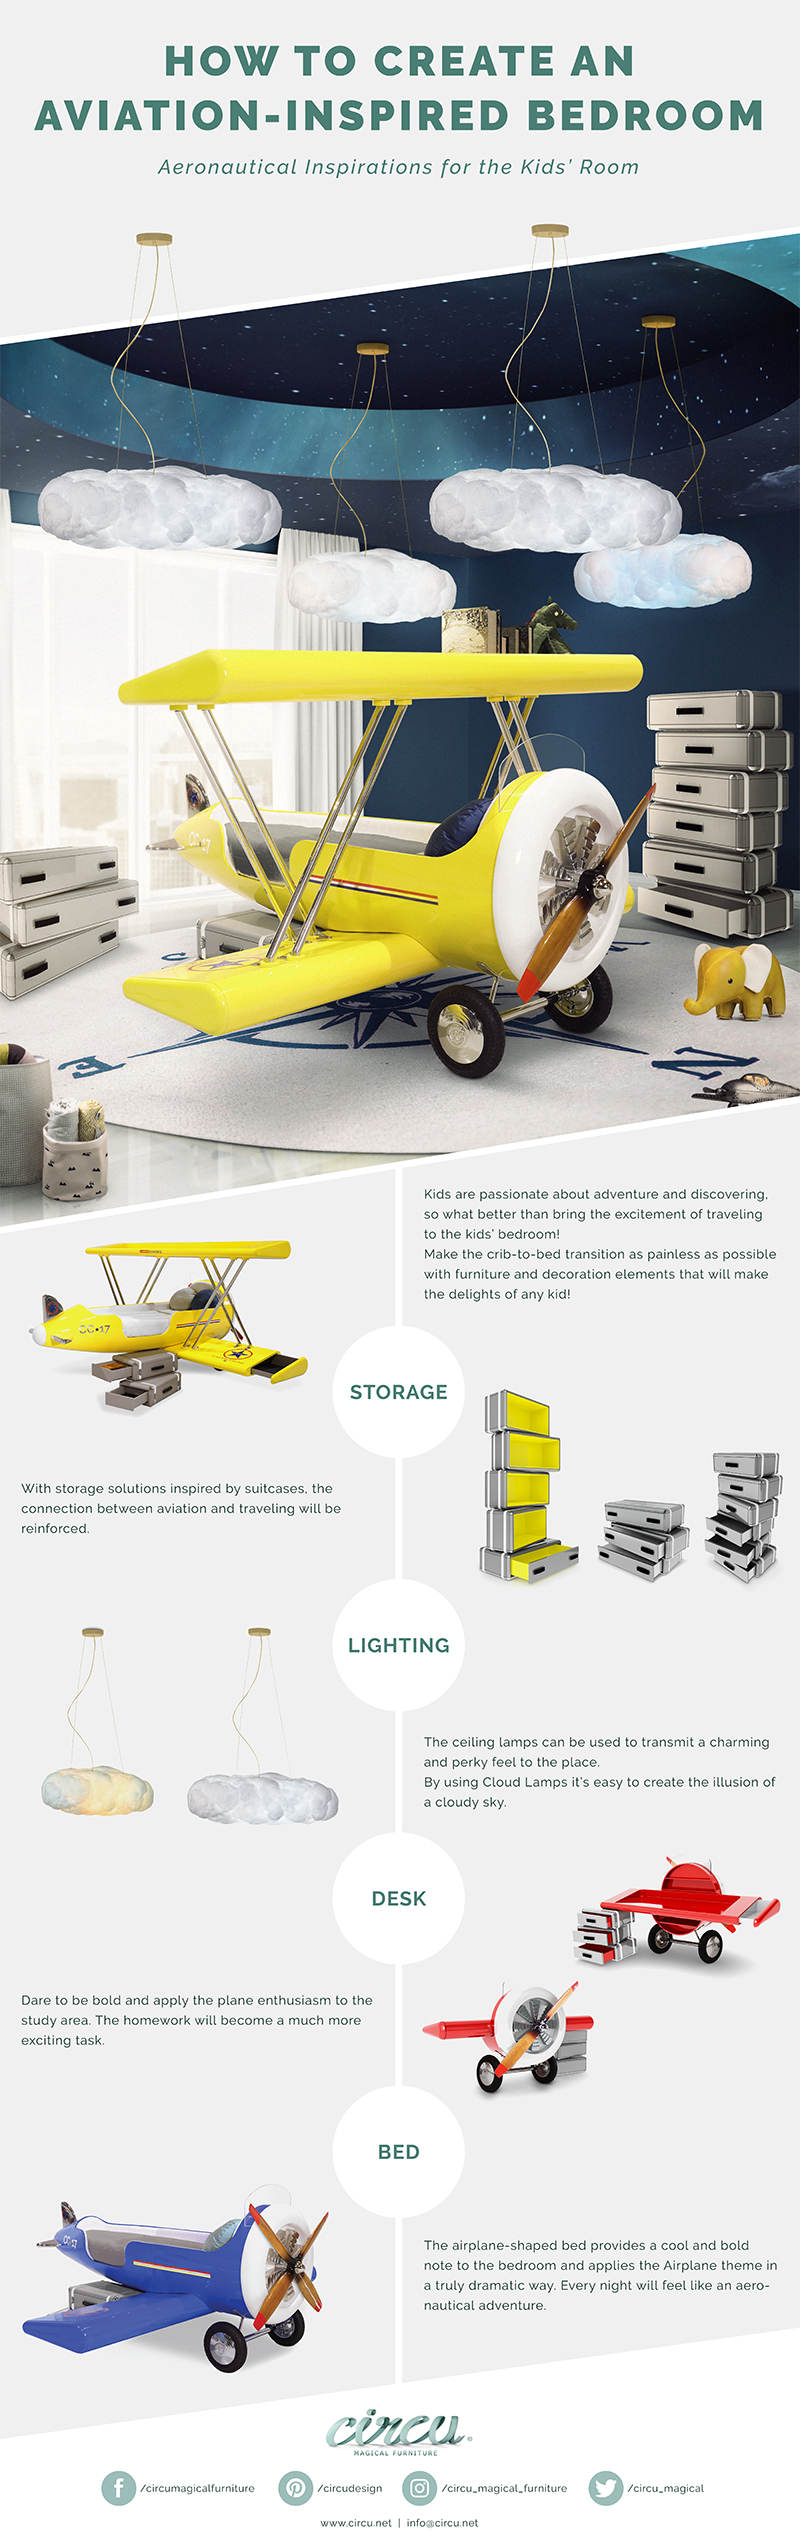 How To Create an Amazing Airplane Themed Bedroom Decor ➤ Discover the season's newest designs and inspirations. Visit Design Build Ideas at www.designbuildideas.eu #designbuildideas #homedecorideas #InteriorDesignProjects @designbuildidea @circudesign